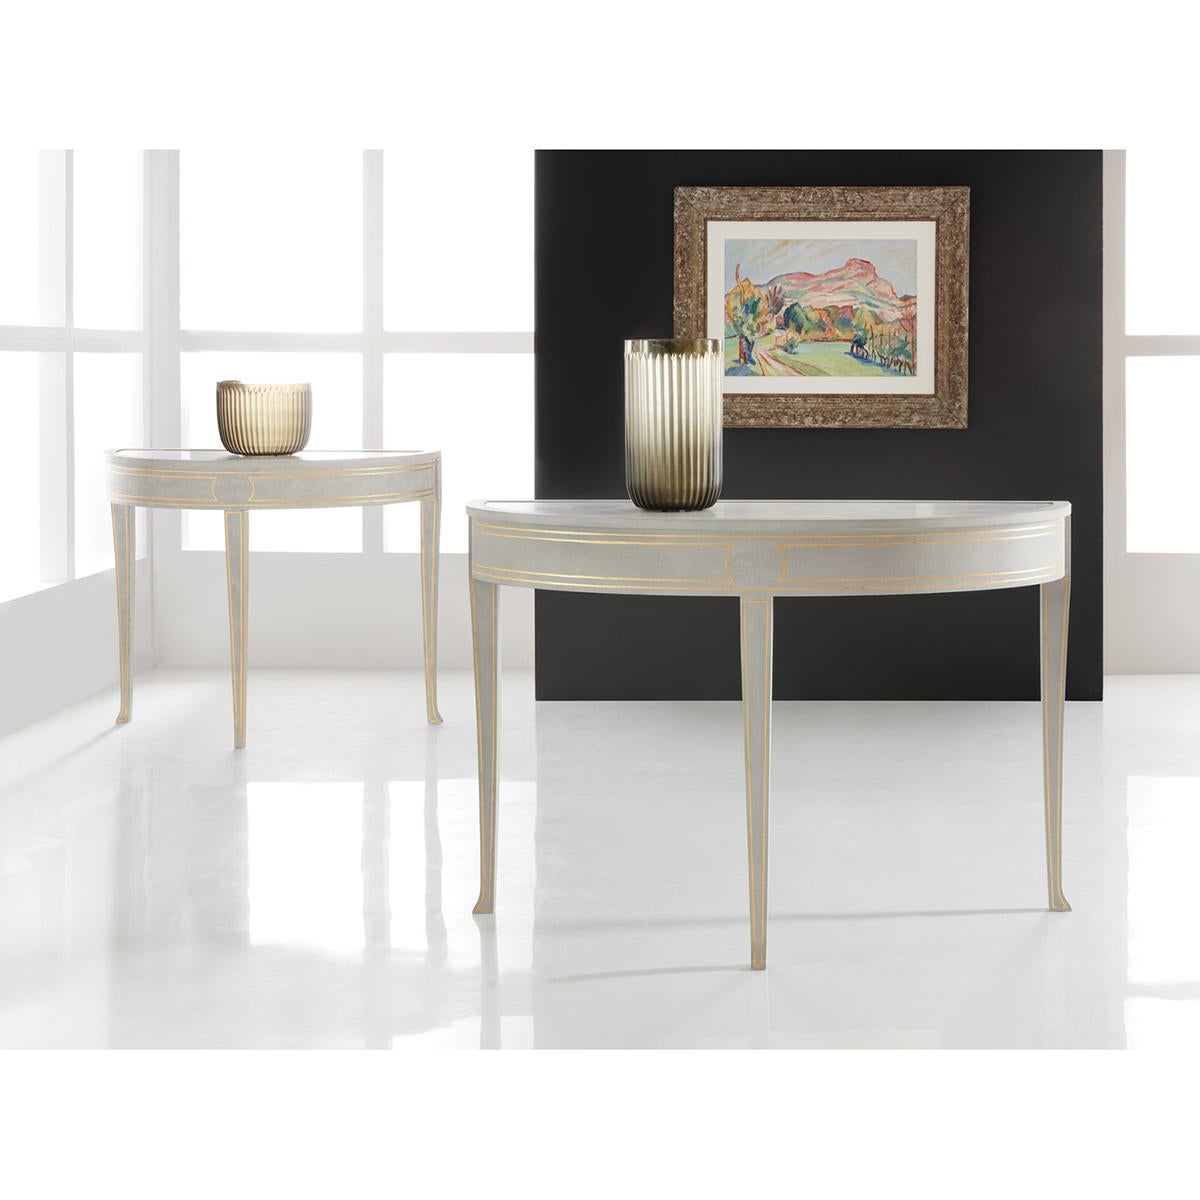 Swedish Painted Console Table, a Neo Classic demilune hall table, with an inset polished Cararra white marble top, a soft grey painted finish with gold leaf trim details around the frieze and down the slender square tapered legs.

Dimensions: 50